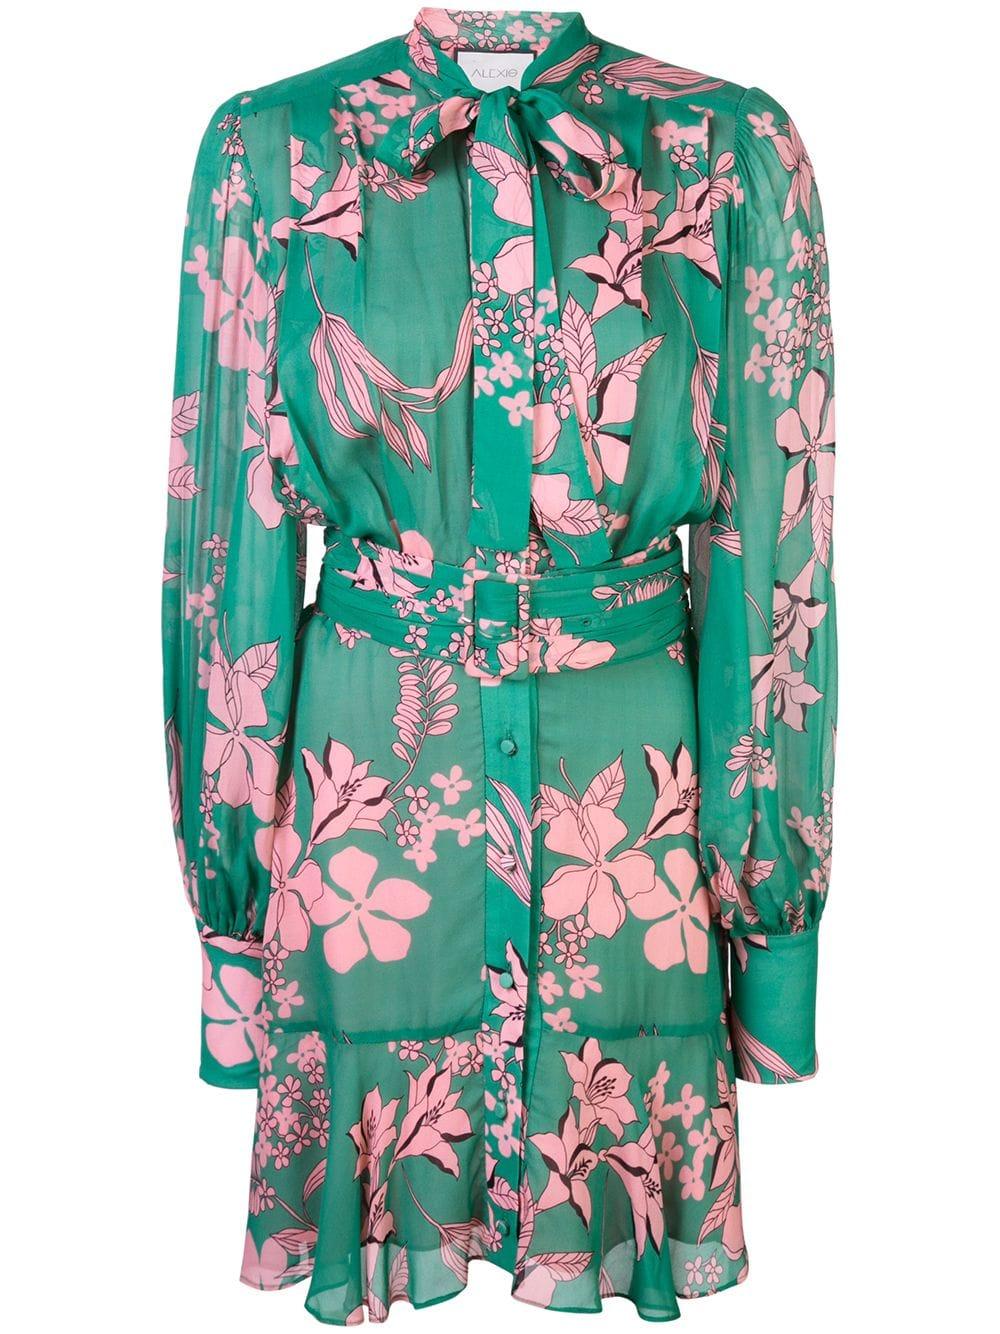 Alexis Tisdale Tie-detailed Floral-print Chiffon Mini Dress in Green | Lyst